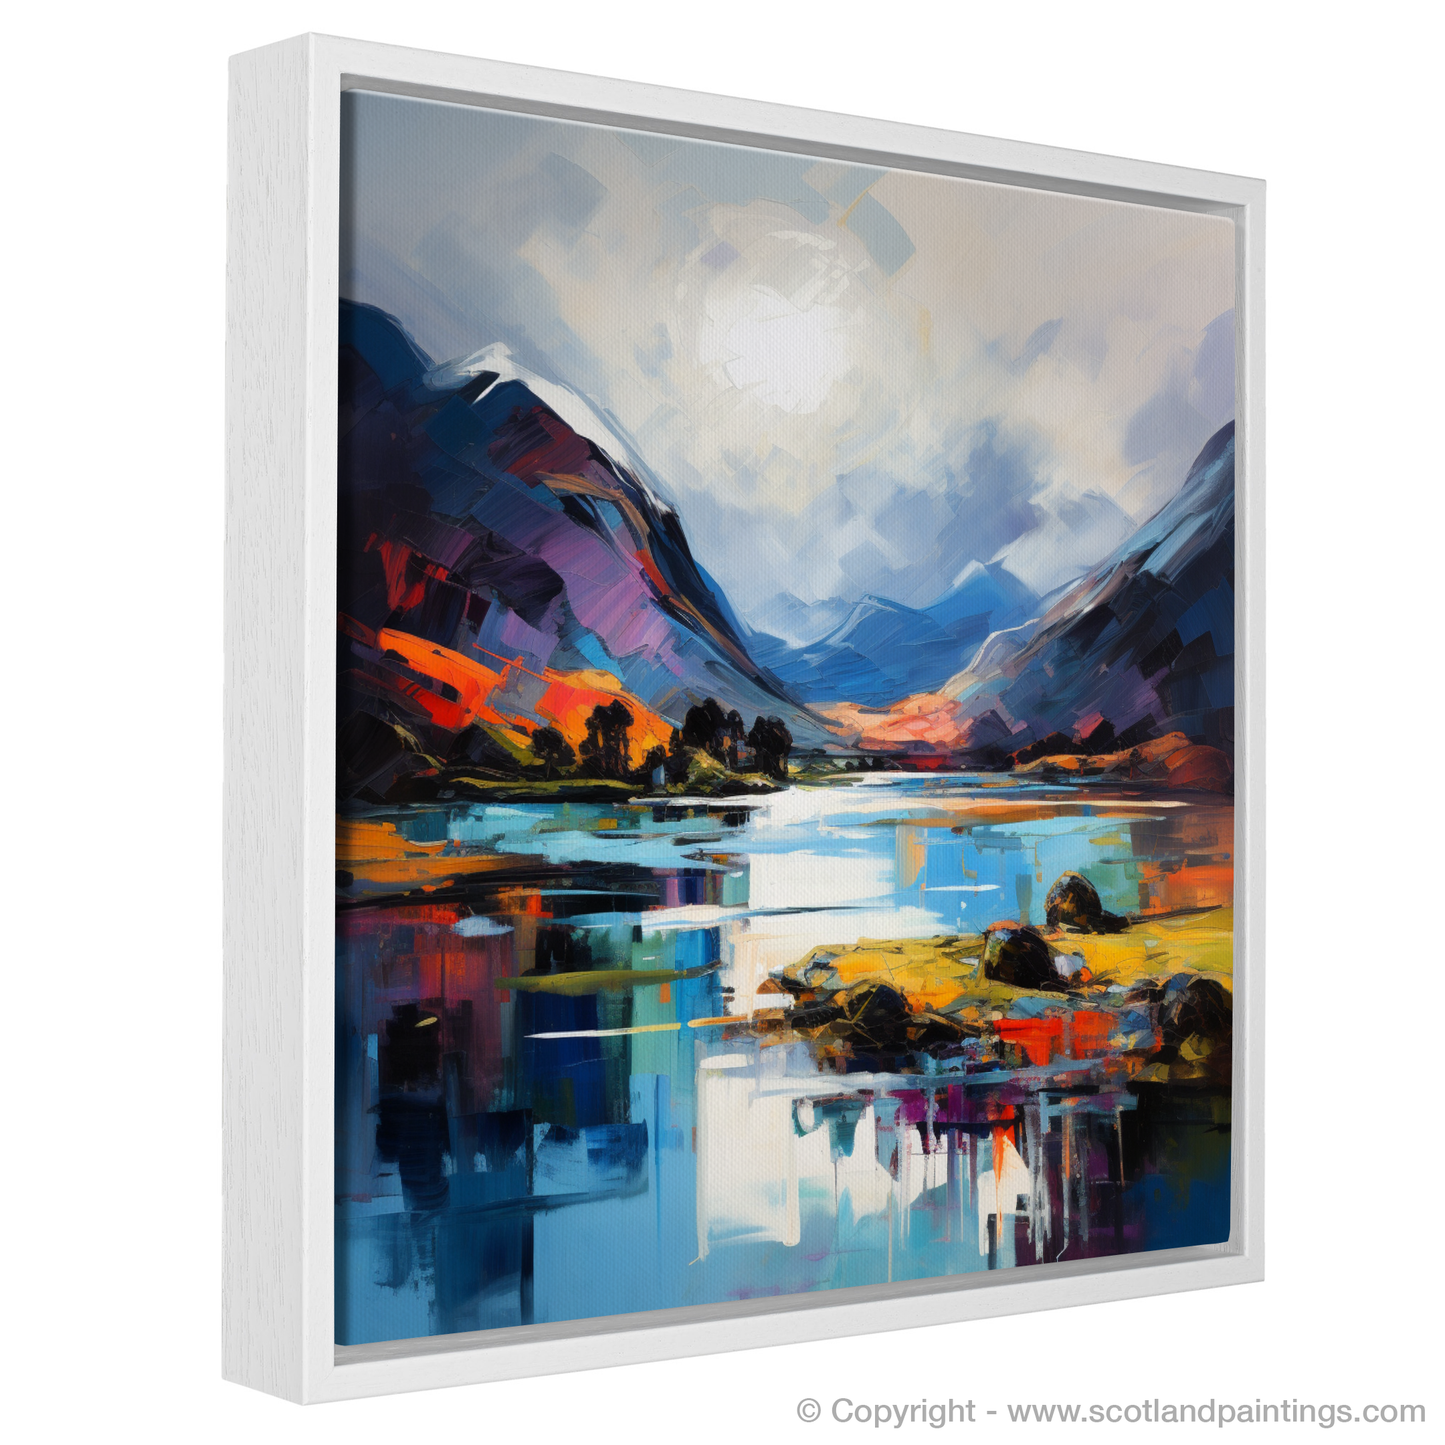 Painting and Art Print of Loch Shiel, Highlands entitled "Highland Emotions: An Expressionist Ode to Loch Shiel".